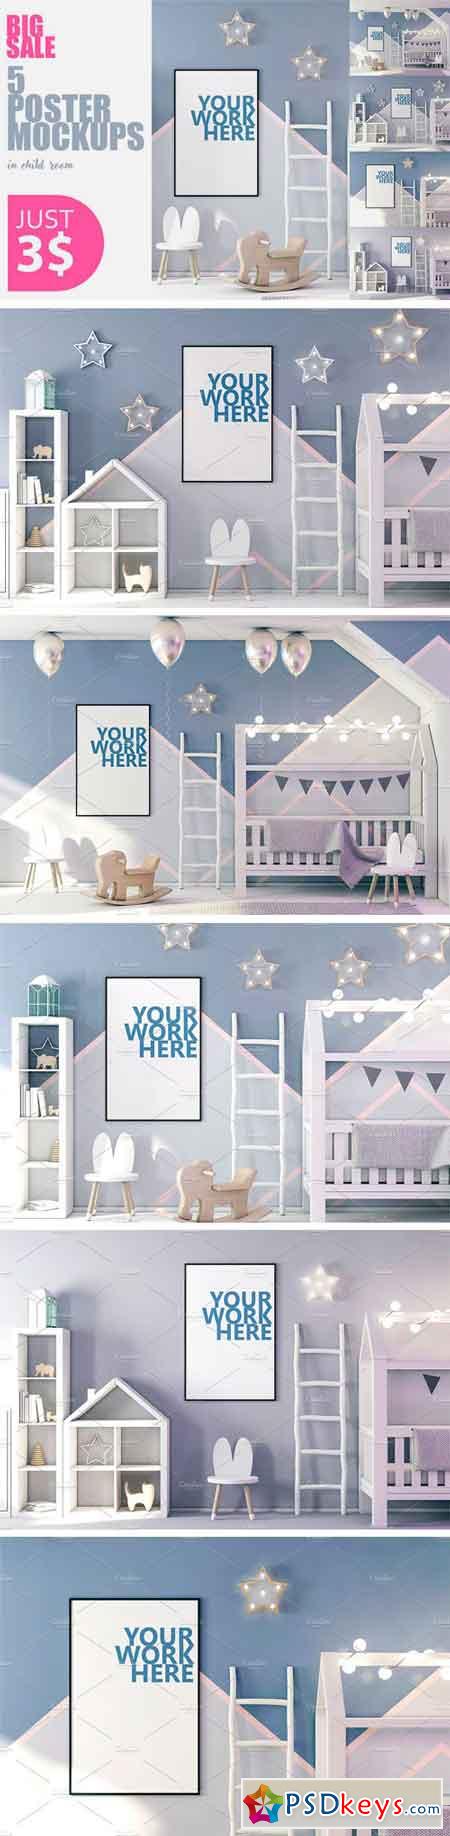 PSD Posters Mockup in Child Interior 2350216